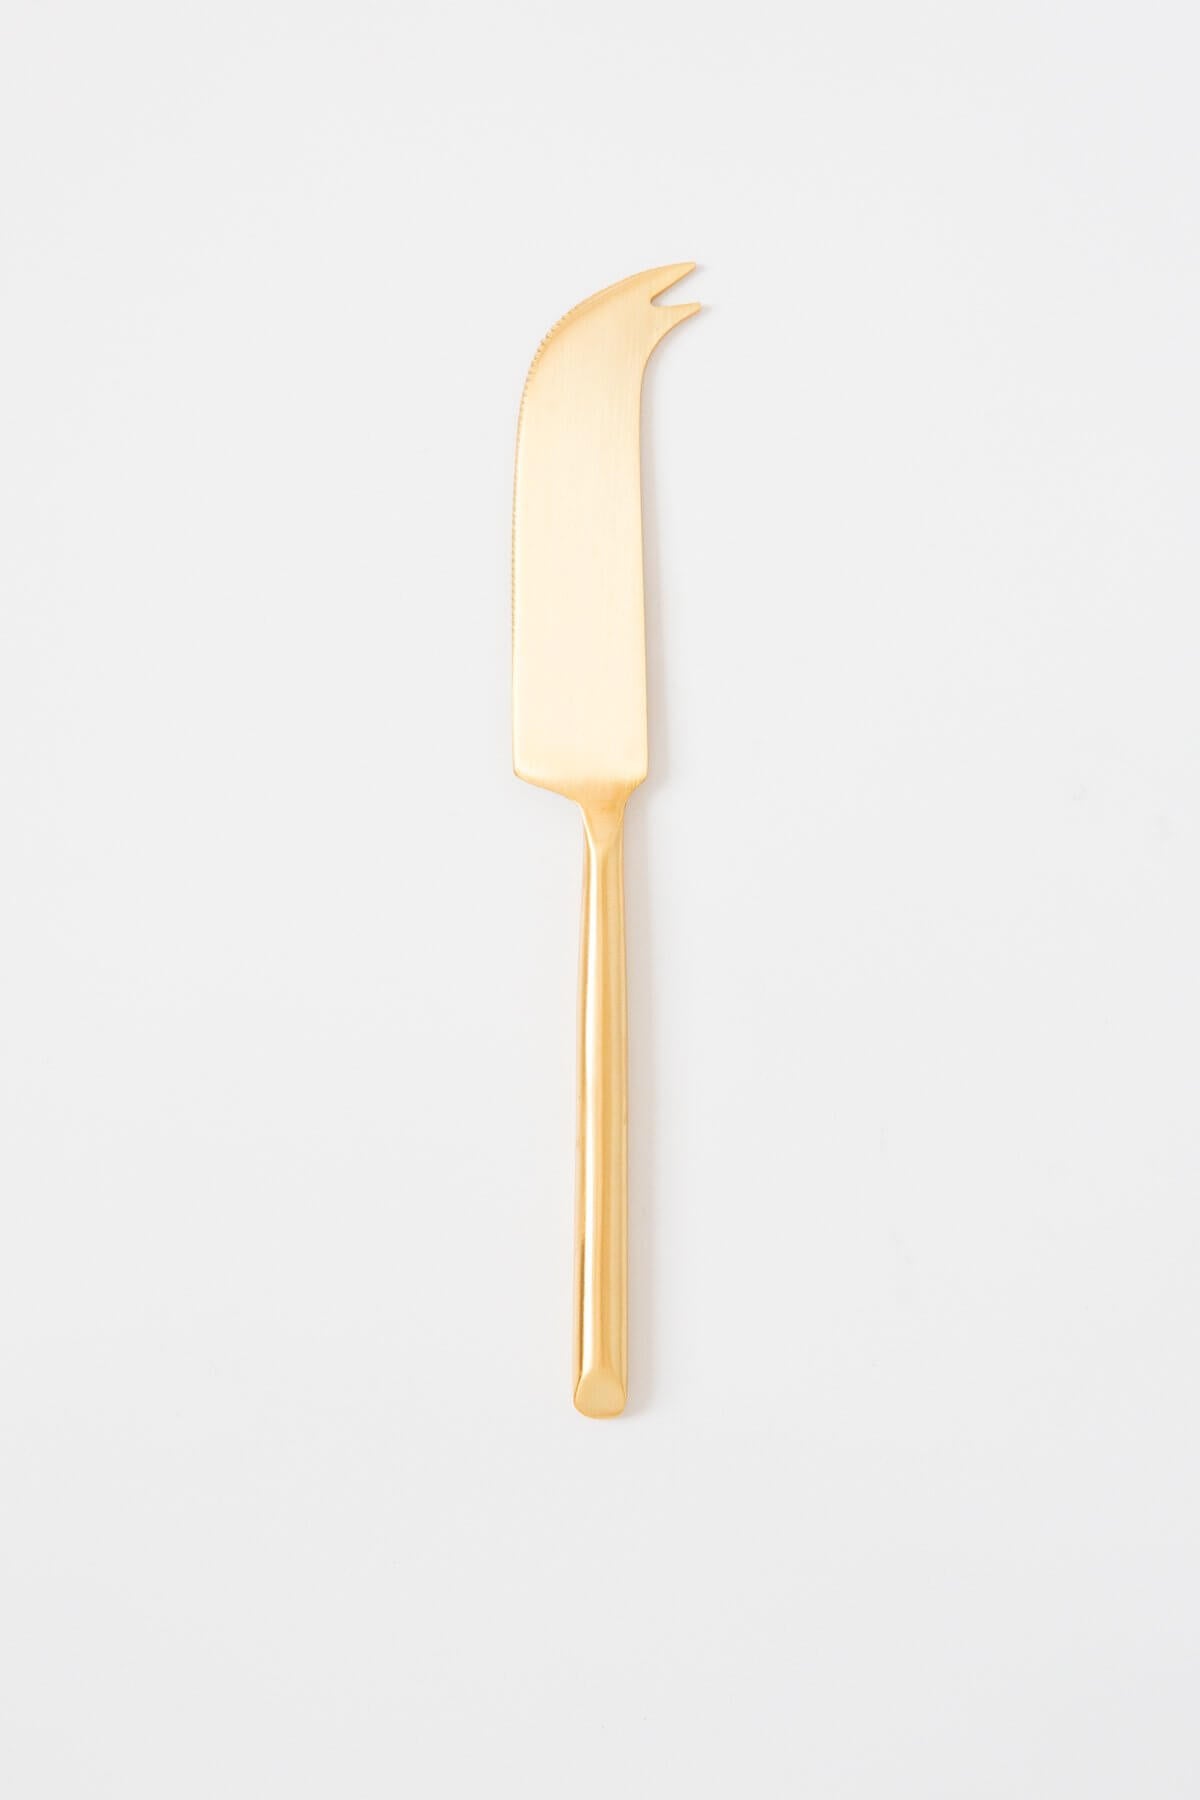 BE HOME Matte Gold Cheese Knife - Palm and Perkins